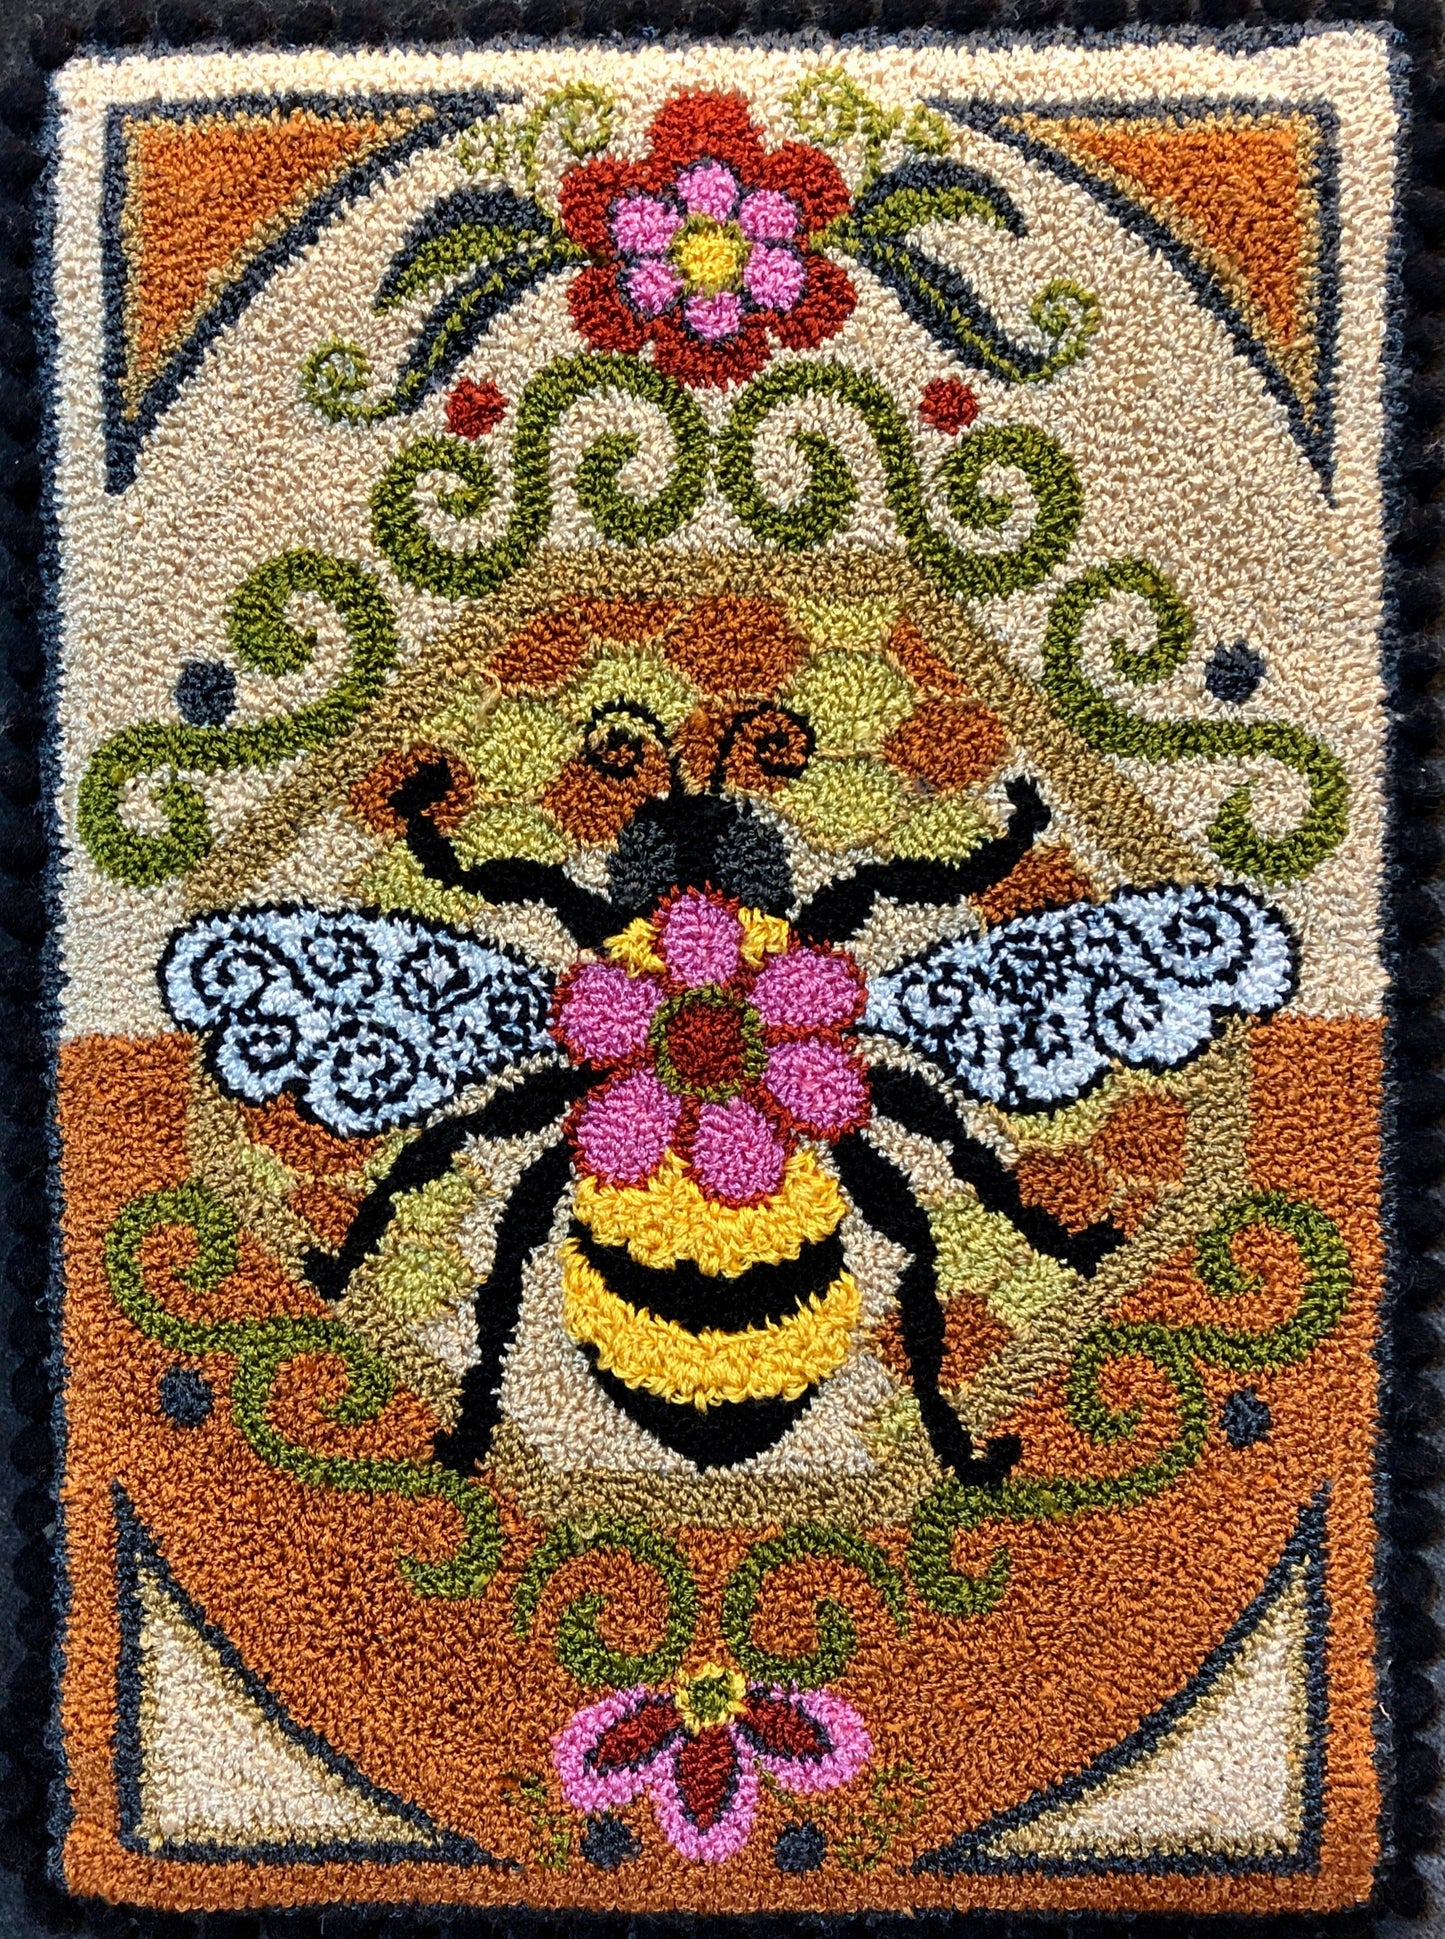 Bumblebee I- Rug Hooking Pattern on Linen, by Orphaned Wool